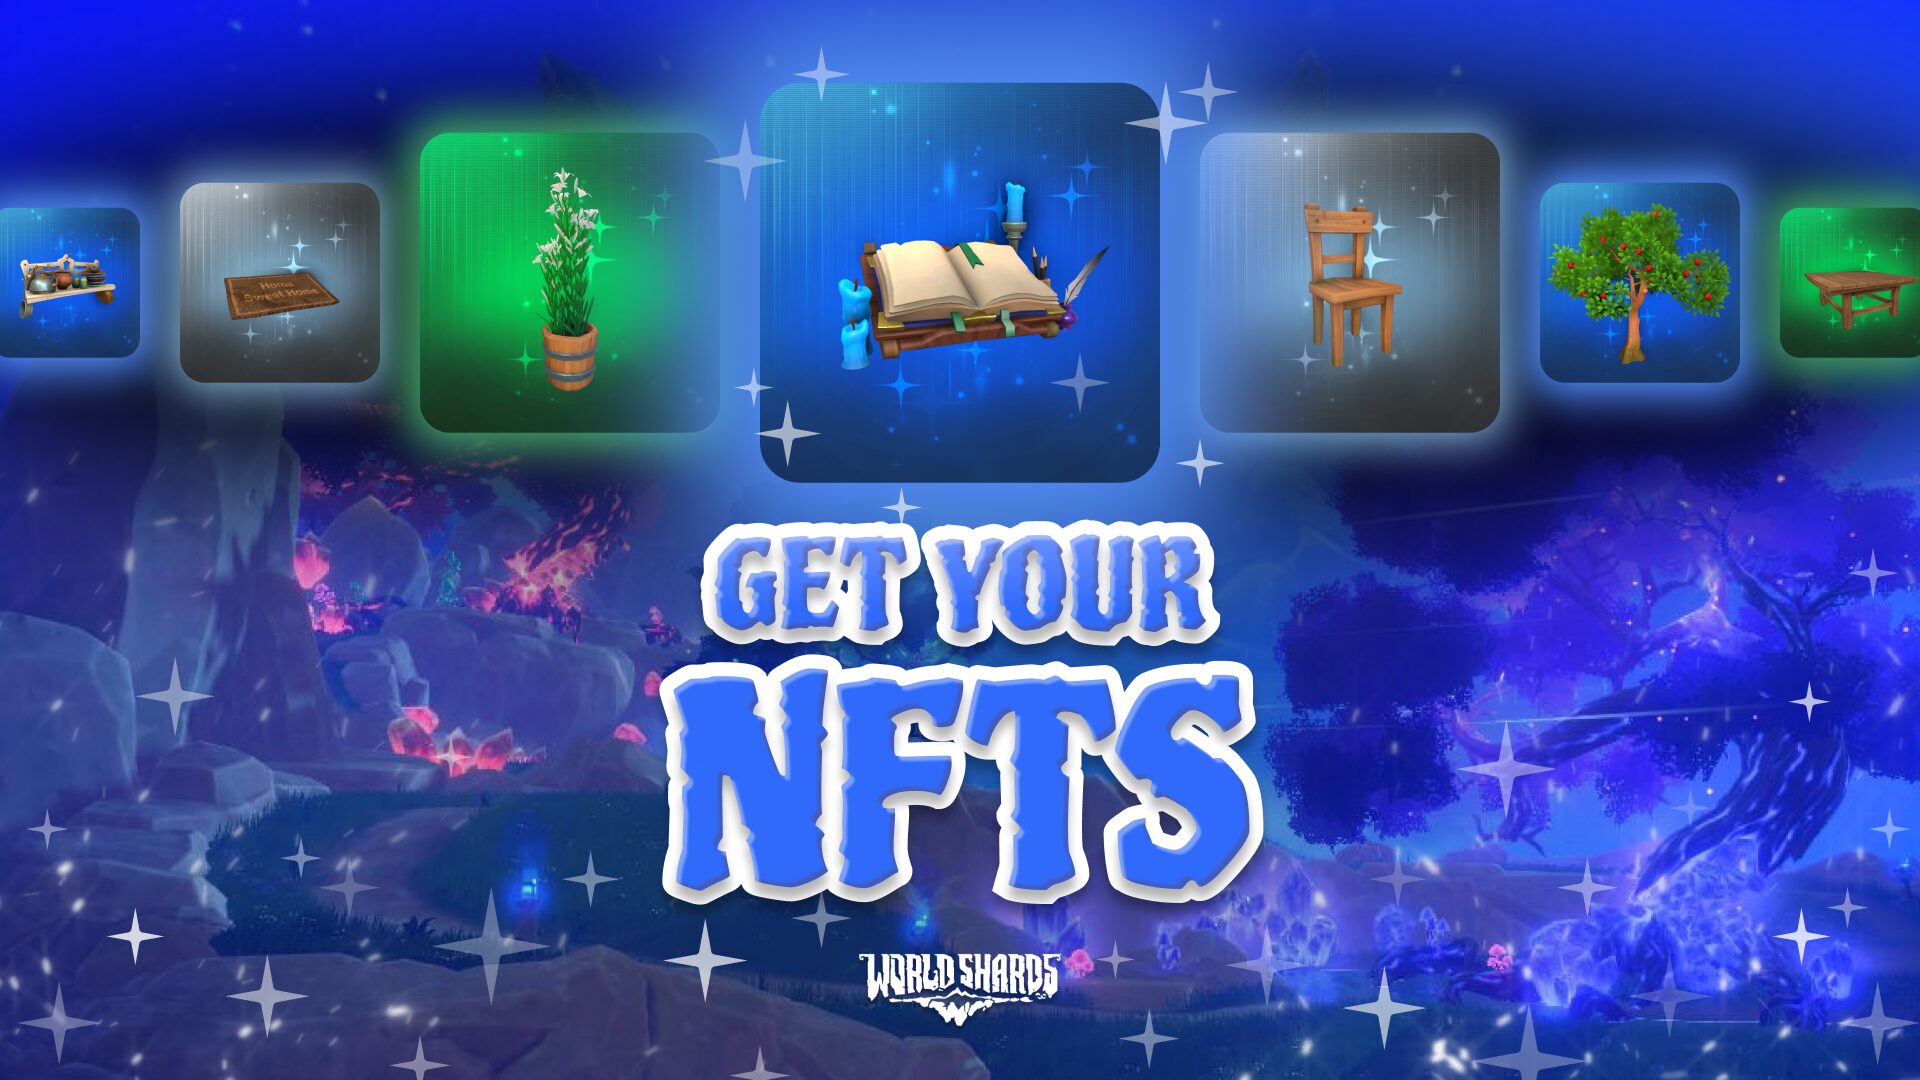 Find NFTs in Worldshards Early Access